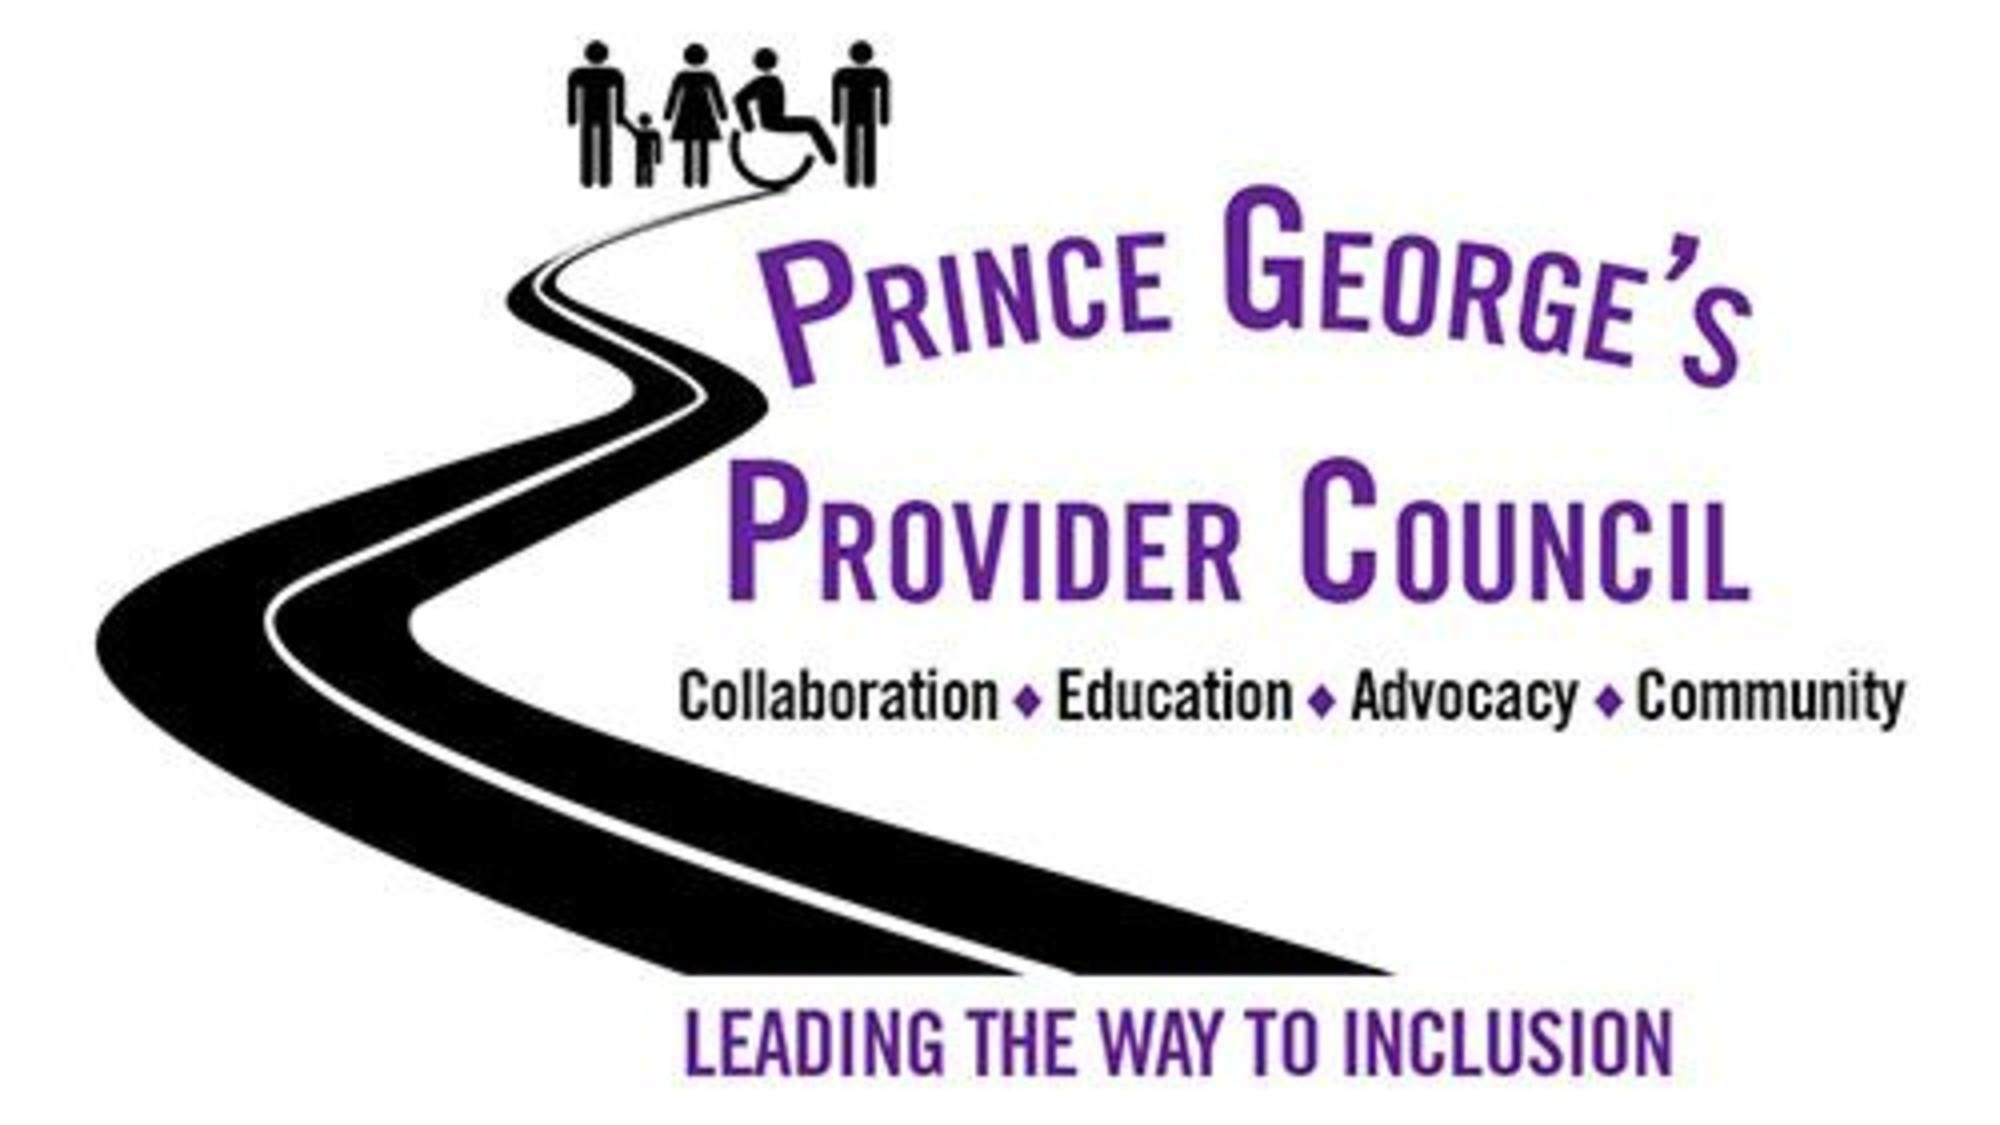 Prince George's Provider Council